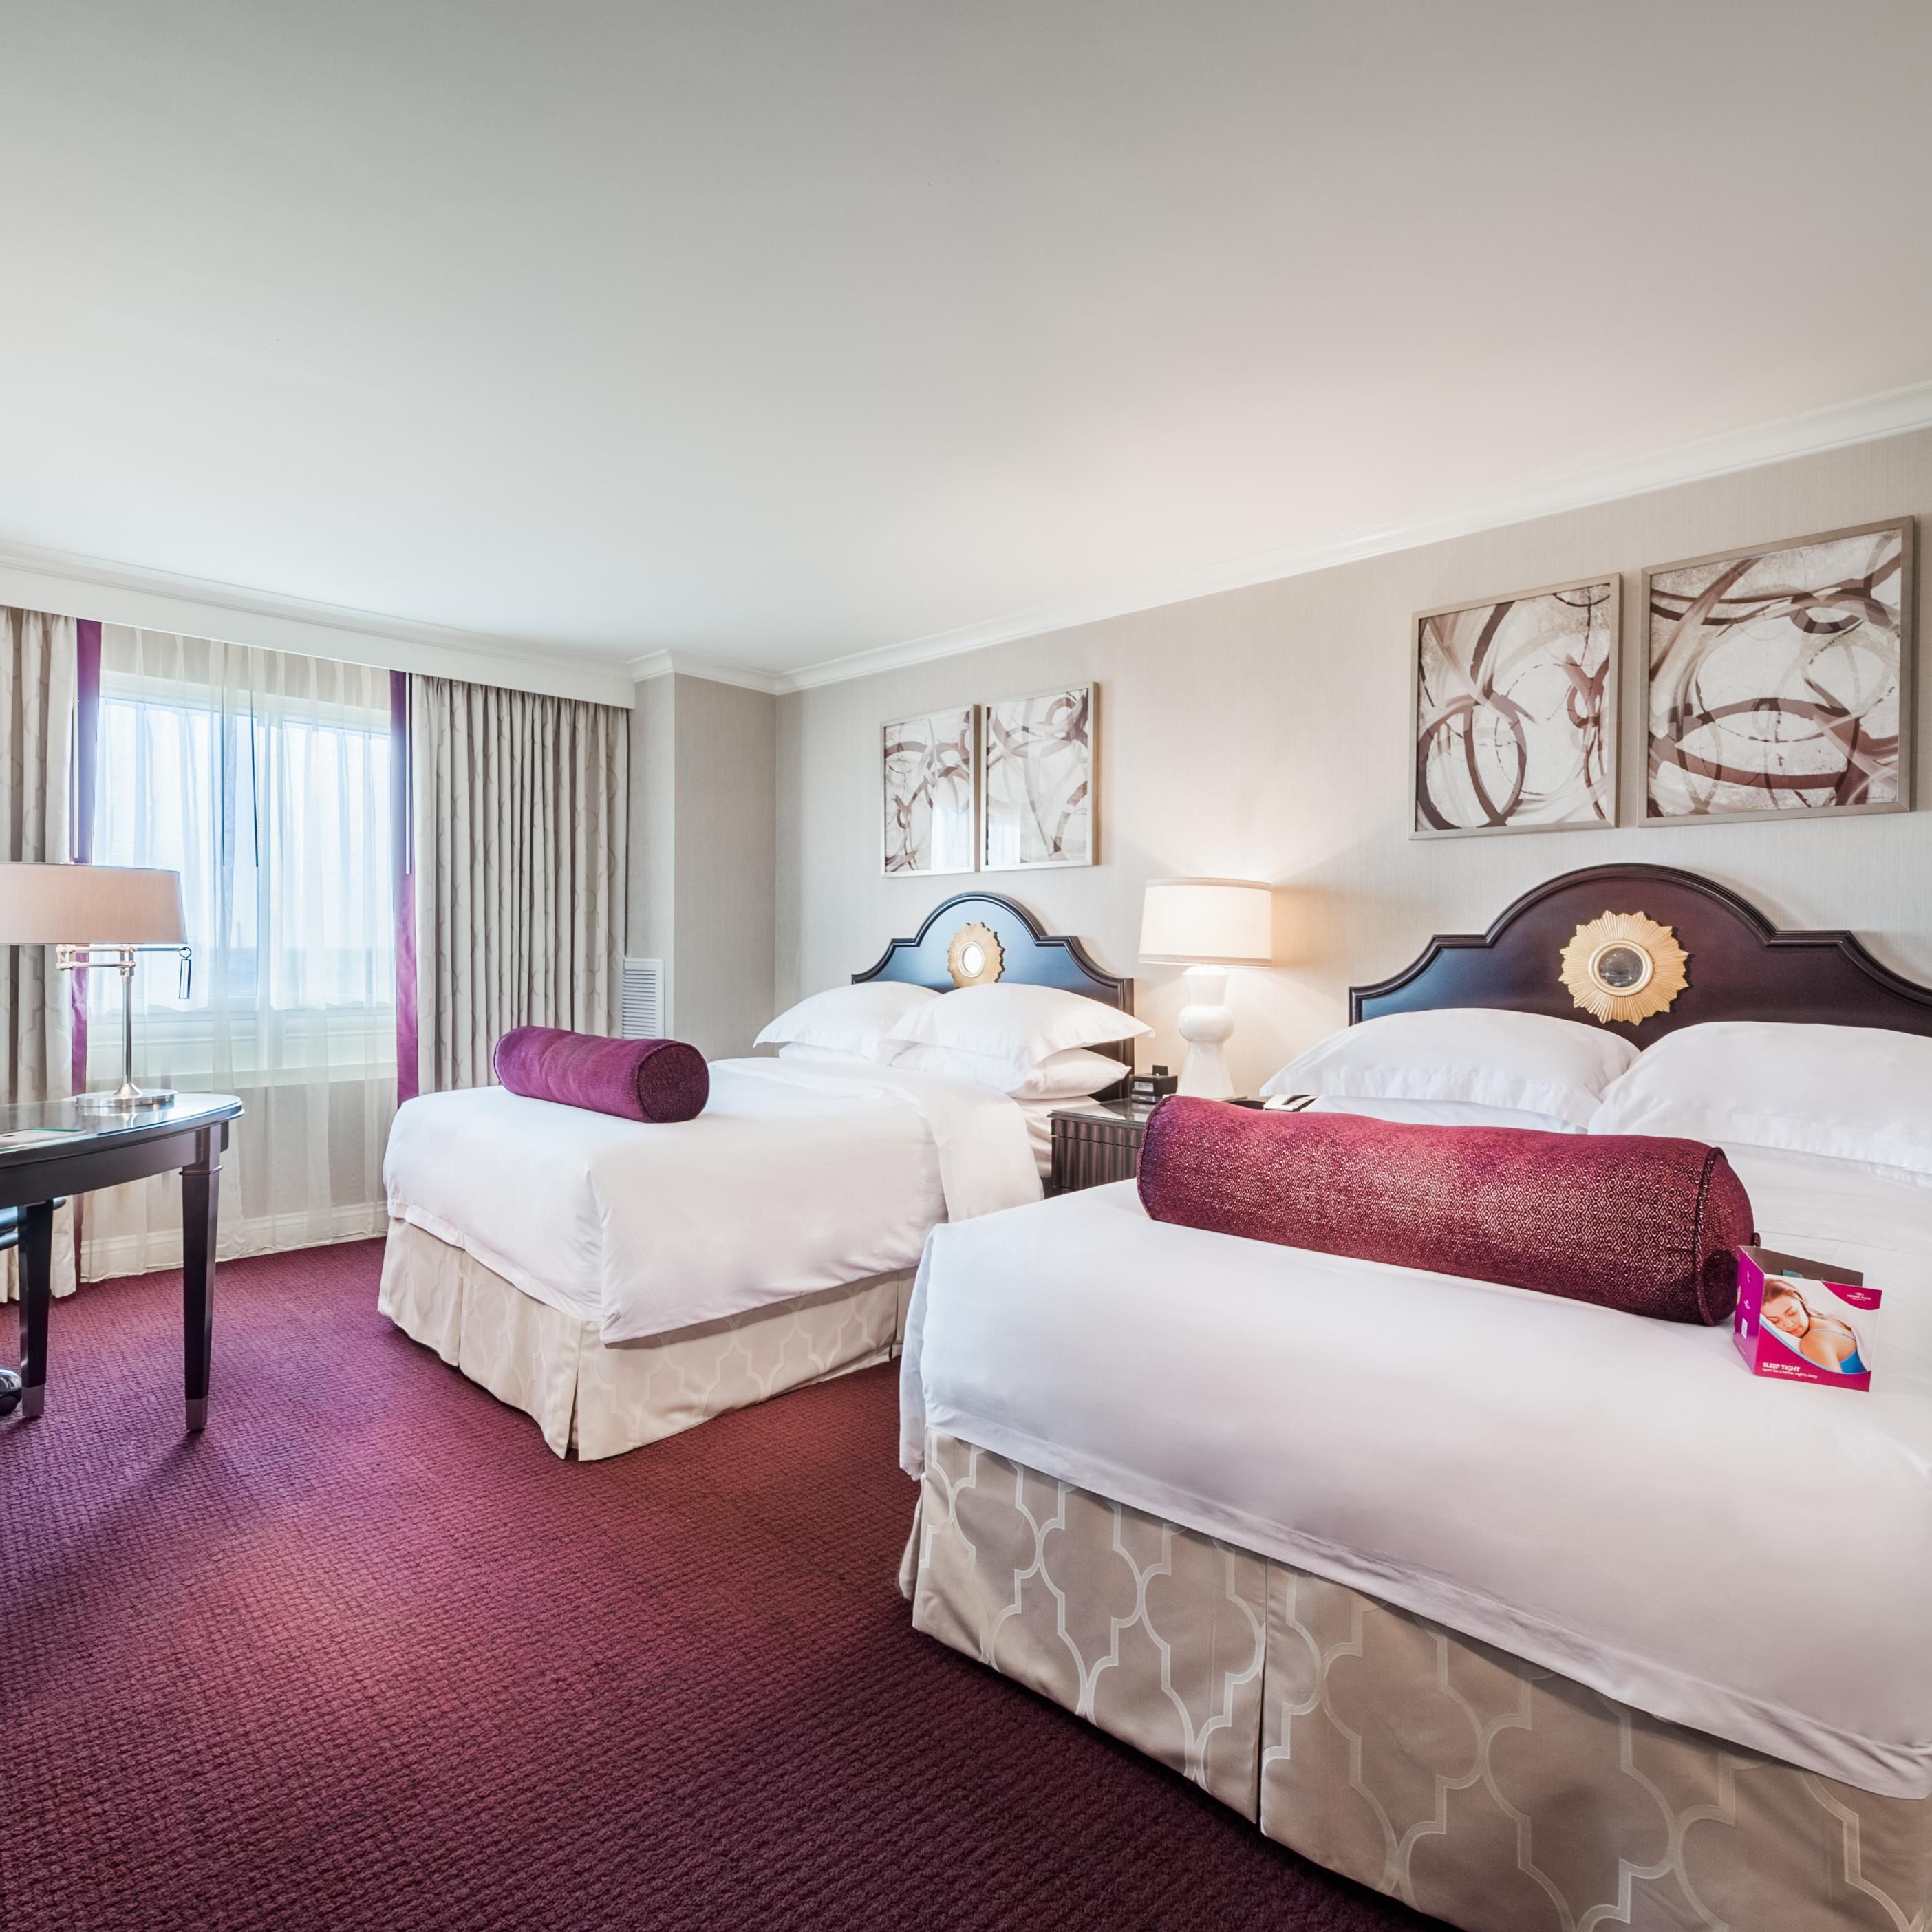 Relax and connect with your family in our standard double room